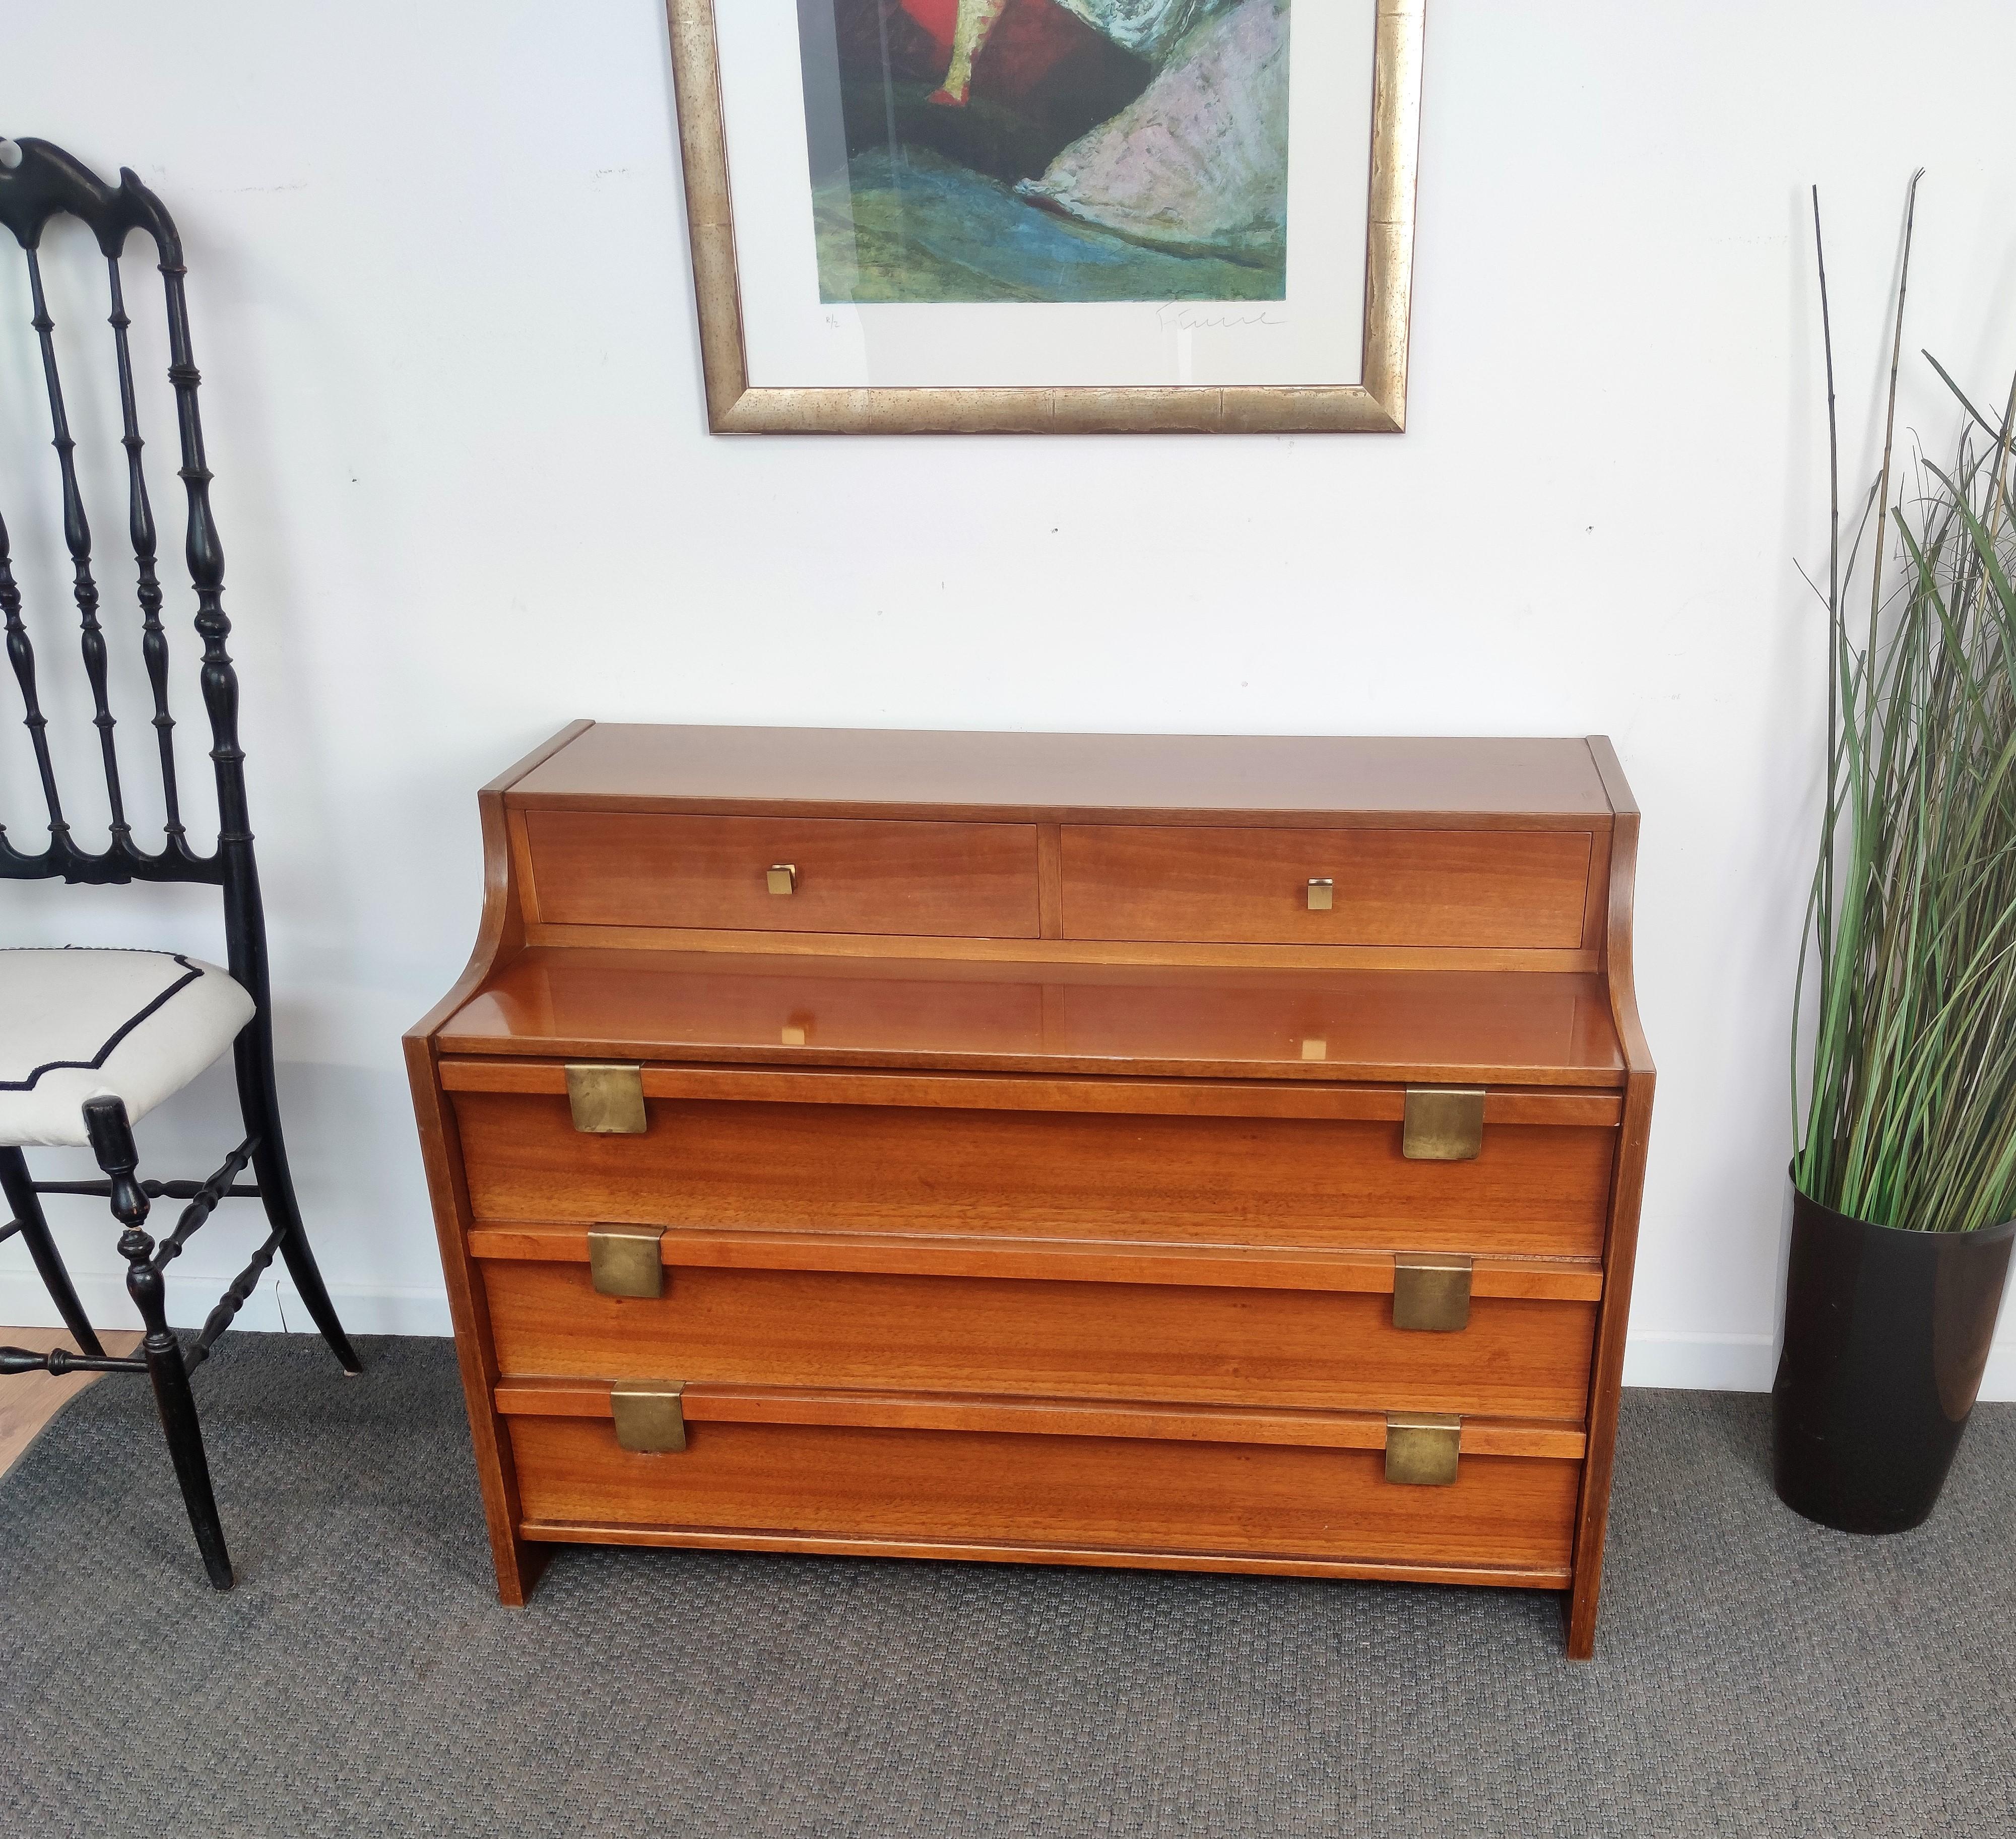 Beautiful Italian 1960s low sideboard, credenza or chest of drawers in elegant and classic wood in its natural graining with great gilt brass details such as the drawers handles side shell decorations. This sideboard has 3 frontal drawers while on